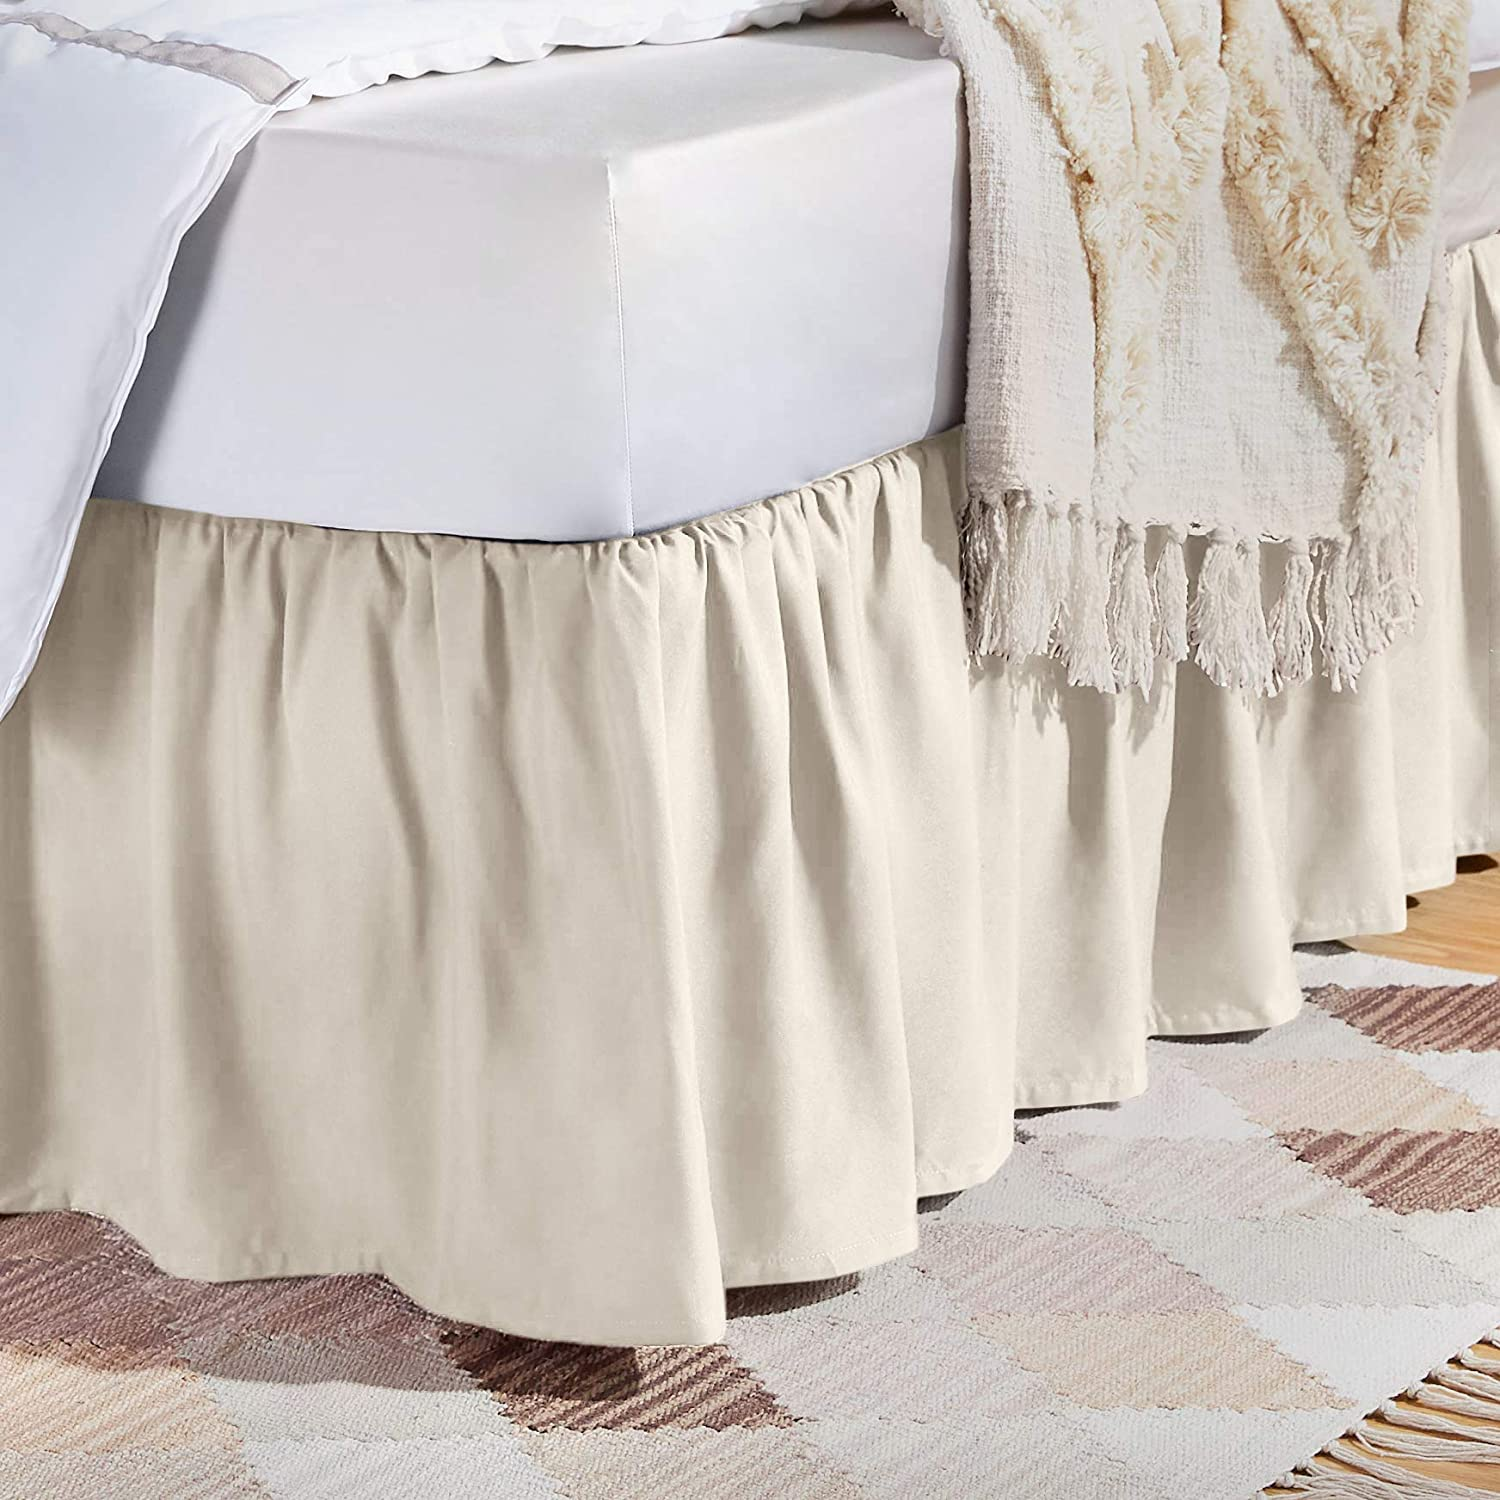 A bed skirt vs. dust ruffle are the same thing. Here is a ruffled bed skirt or dust ruffle covering the side of a bed.